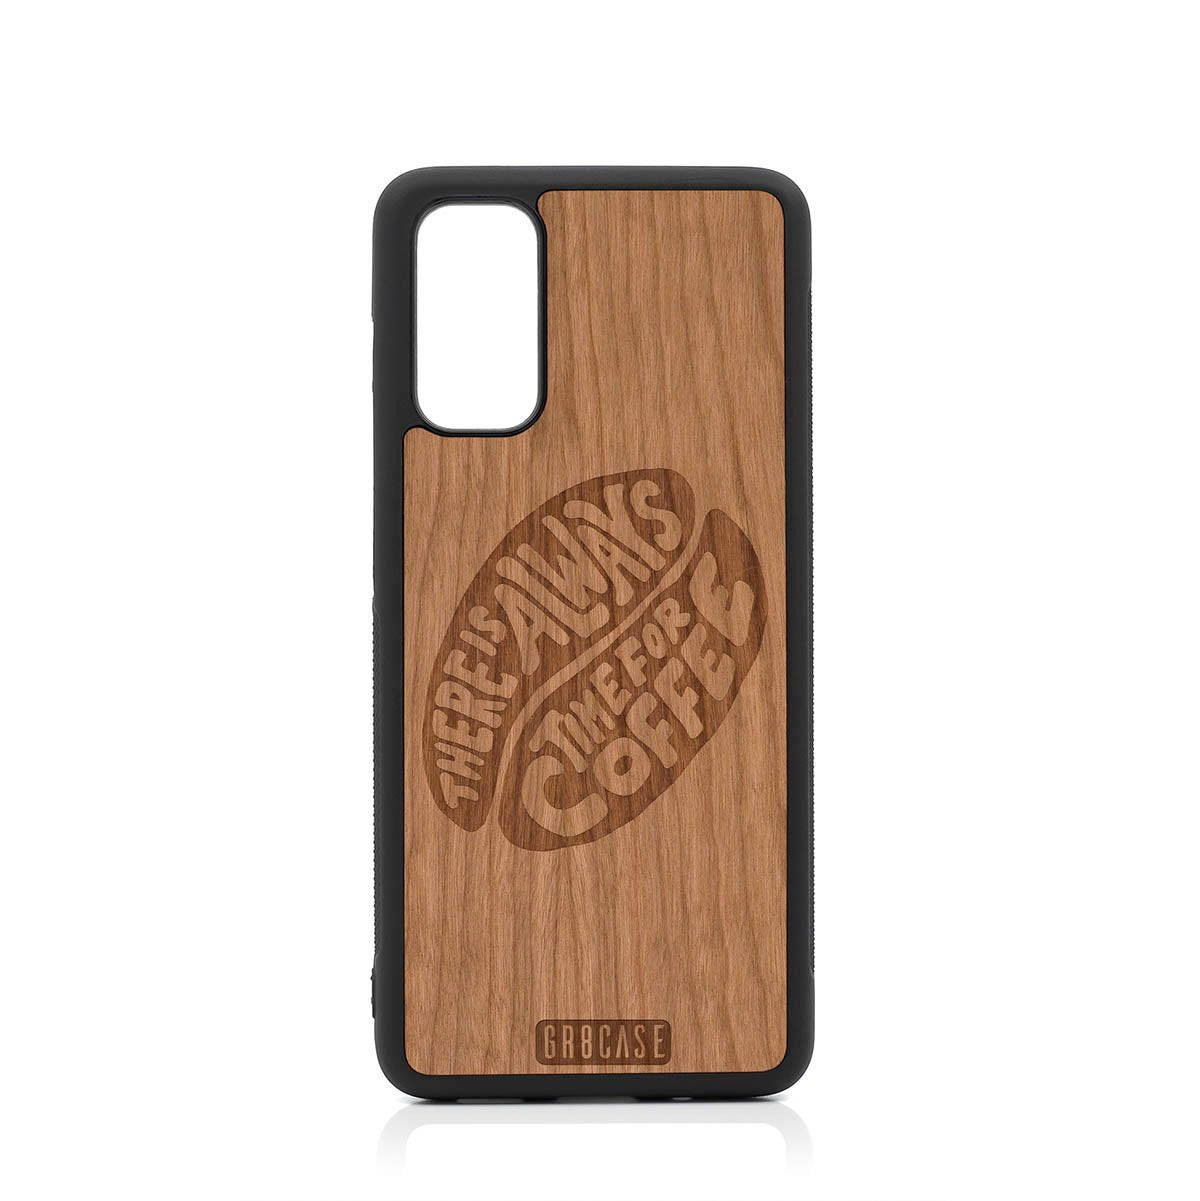 There Is Always Time For Coffee Design Wood Case For Samsung Galaxy S20 FE 5G